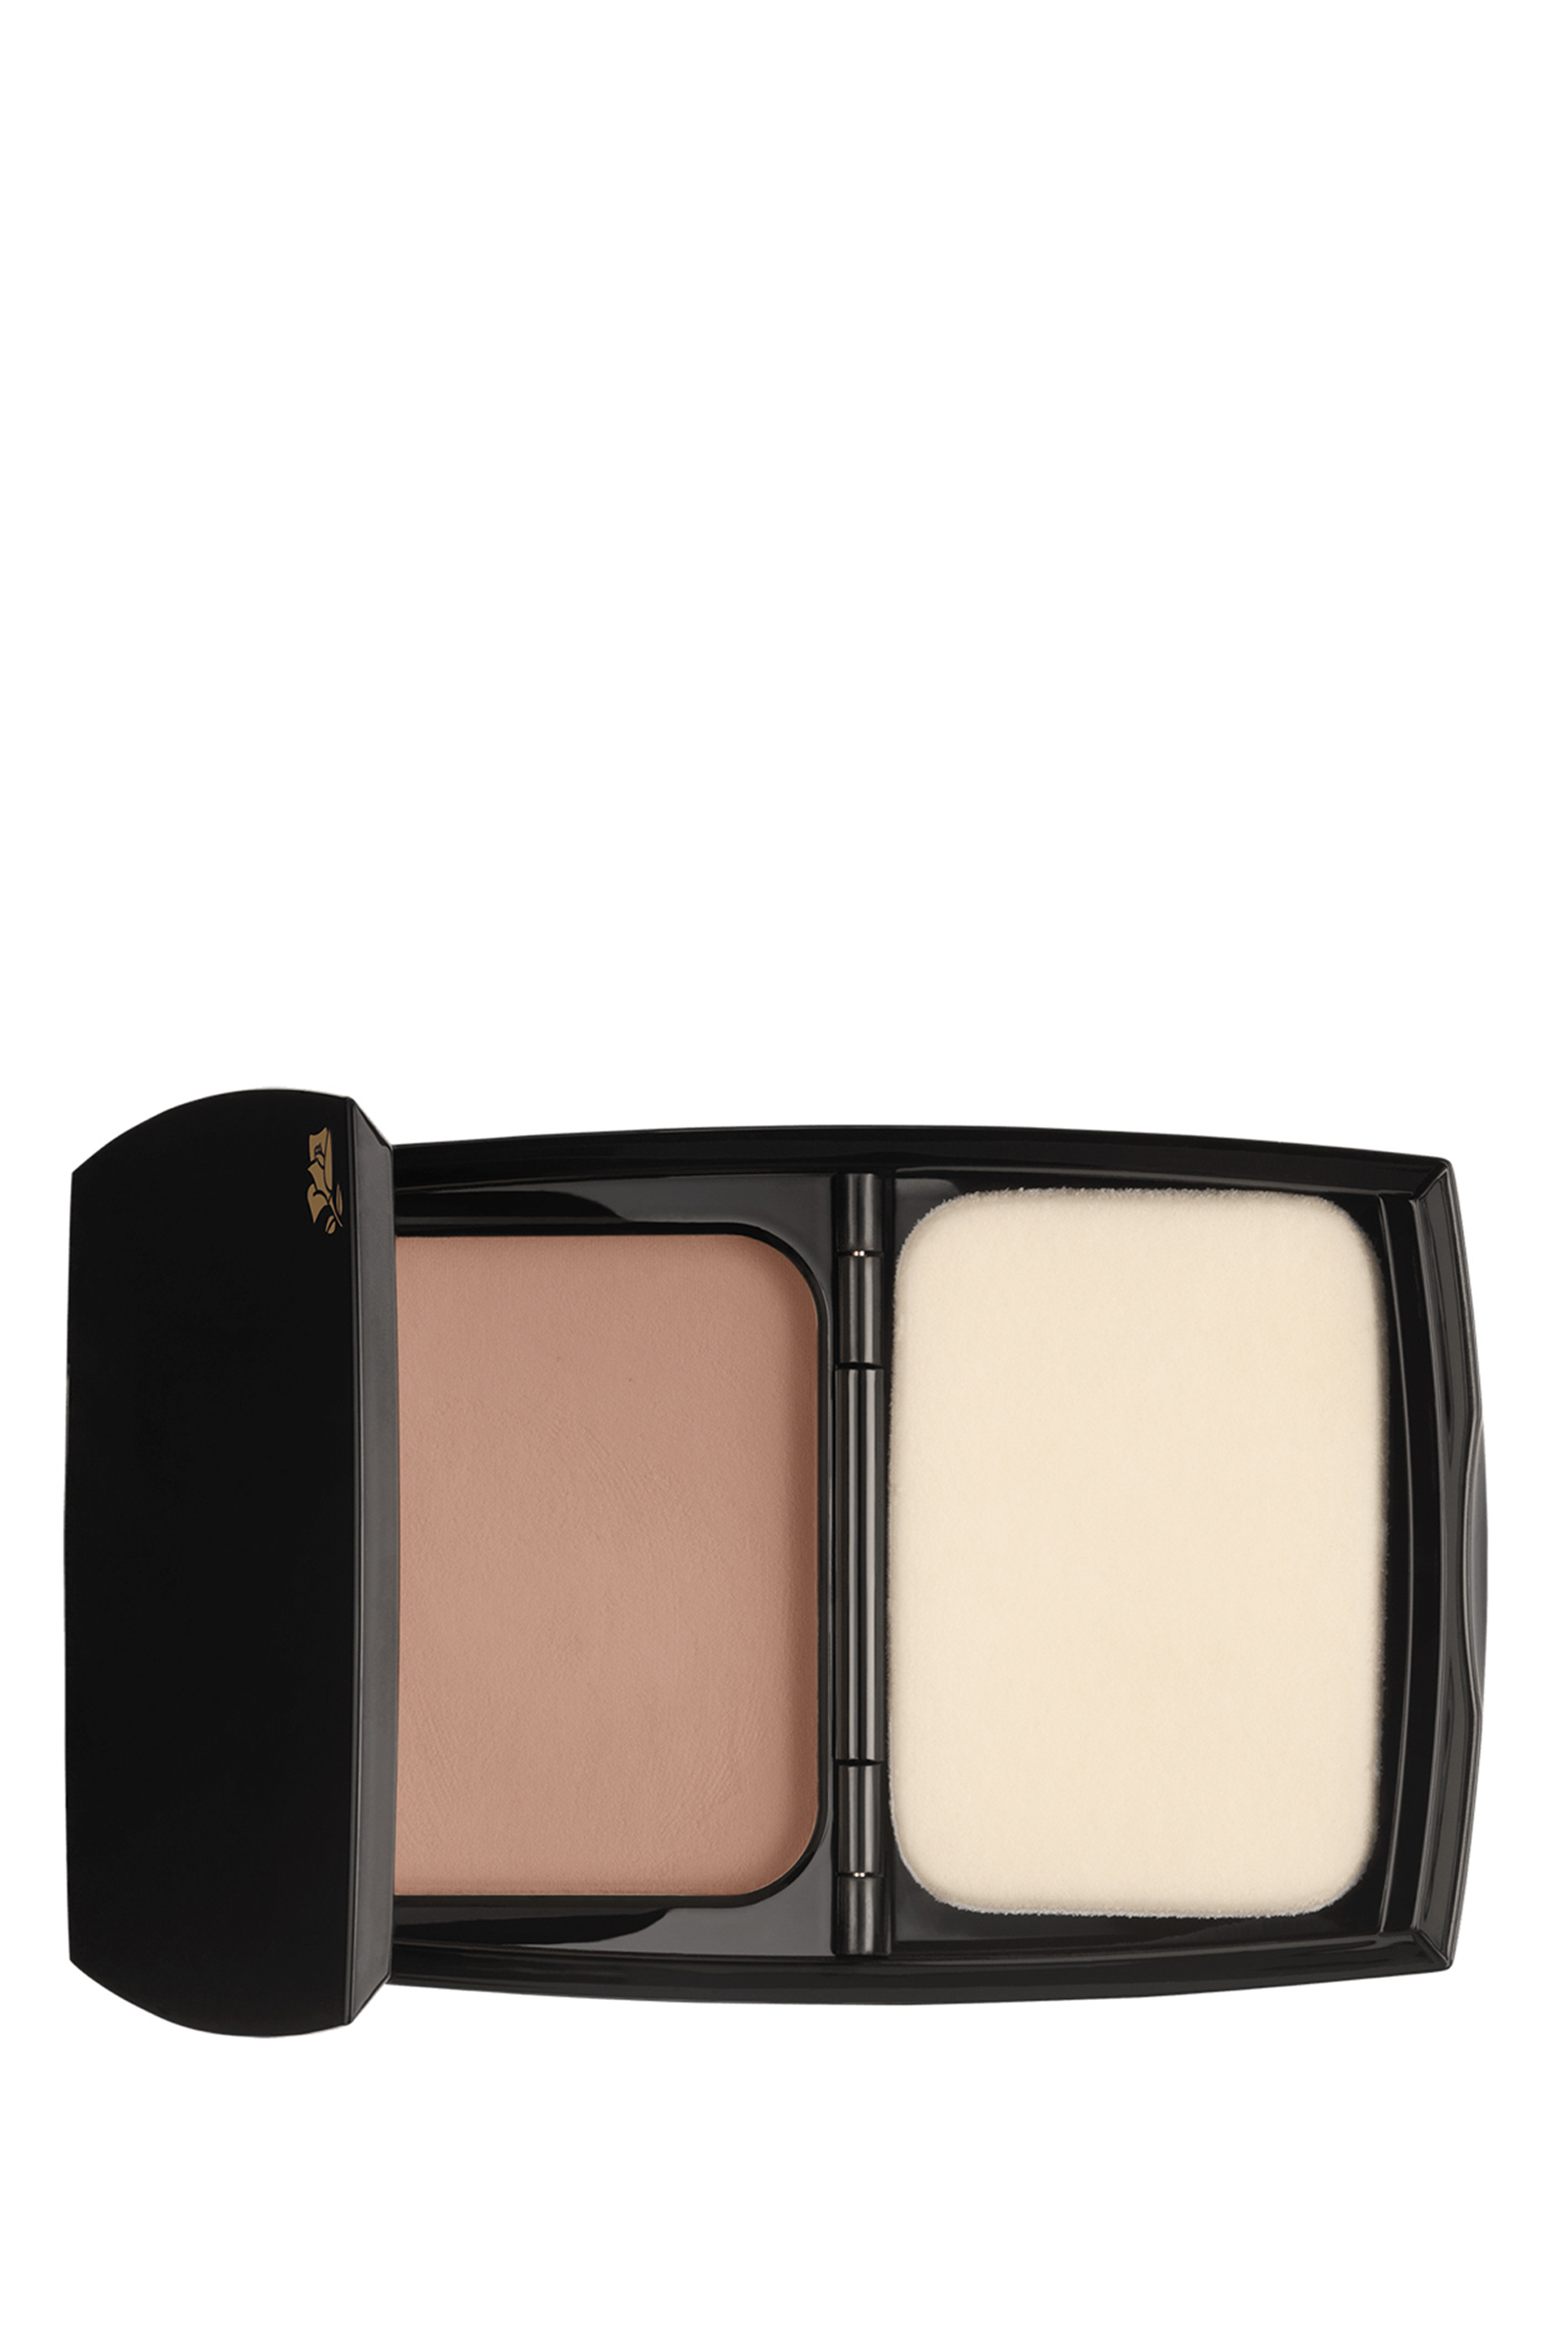 Buy Lancome Teint Idole Ultra Compact Foundation G For Bloomingdale S Uae